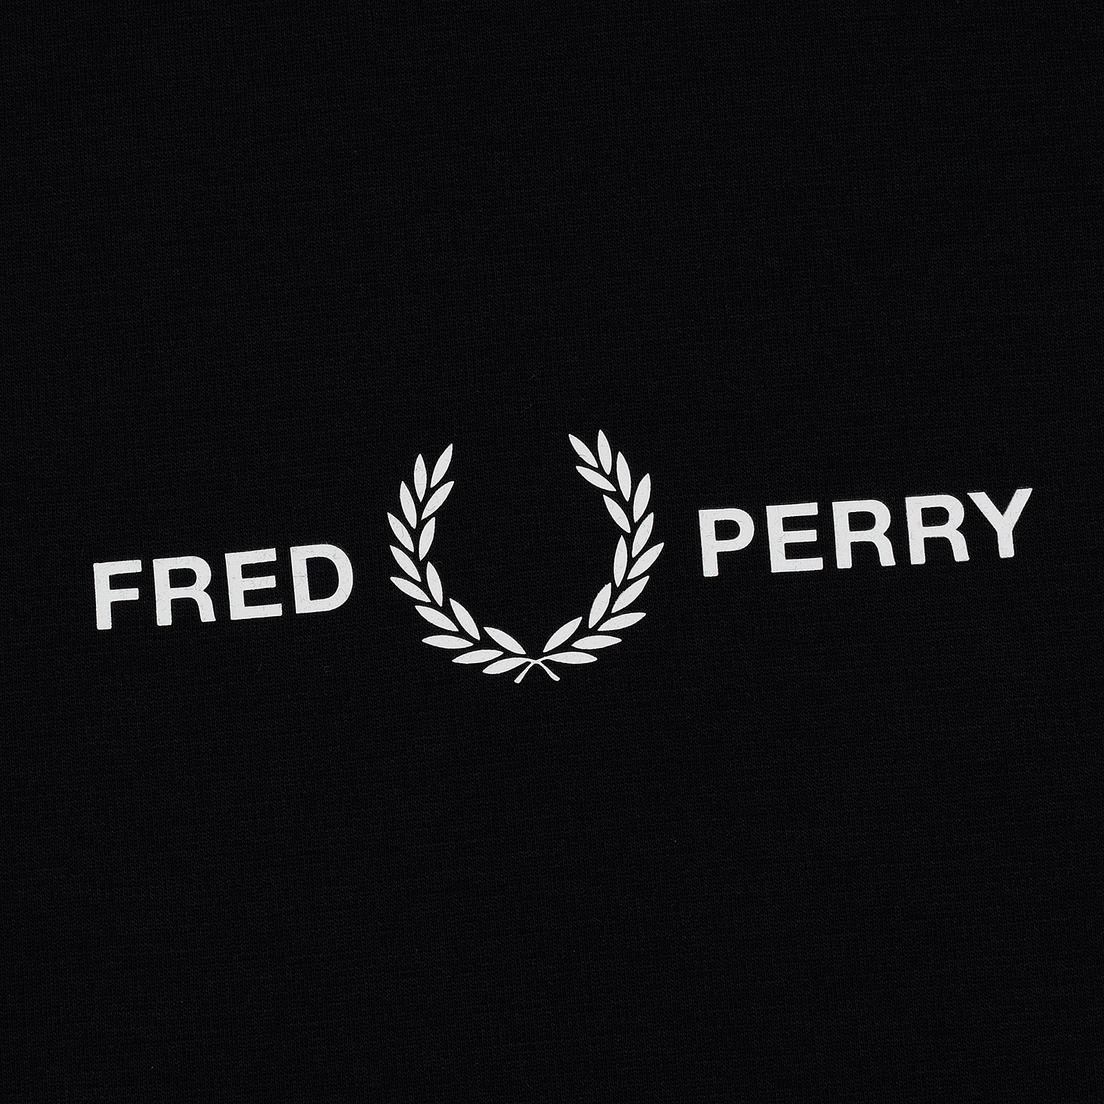 Fred Perry Женская футболка Printed High Neck